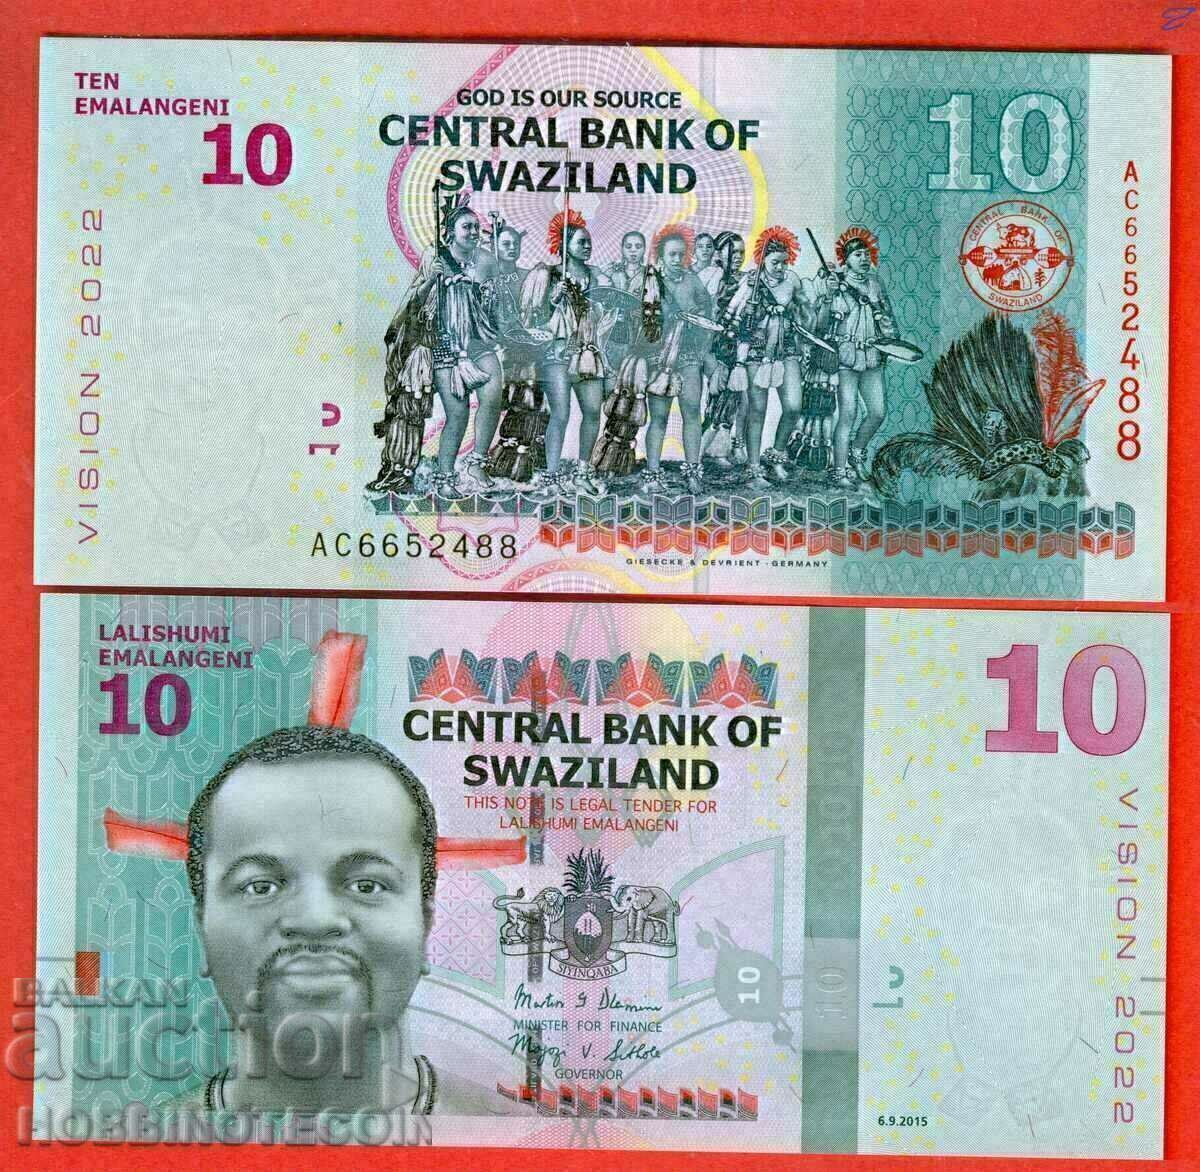 SWAZILAND SWAZILAND 10 issue - issue 2015 NEW UNC